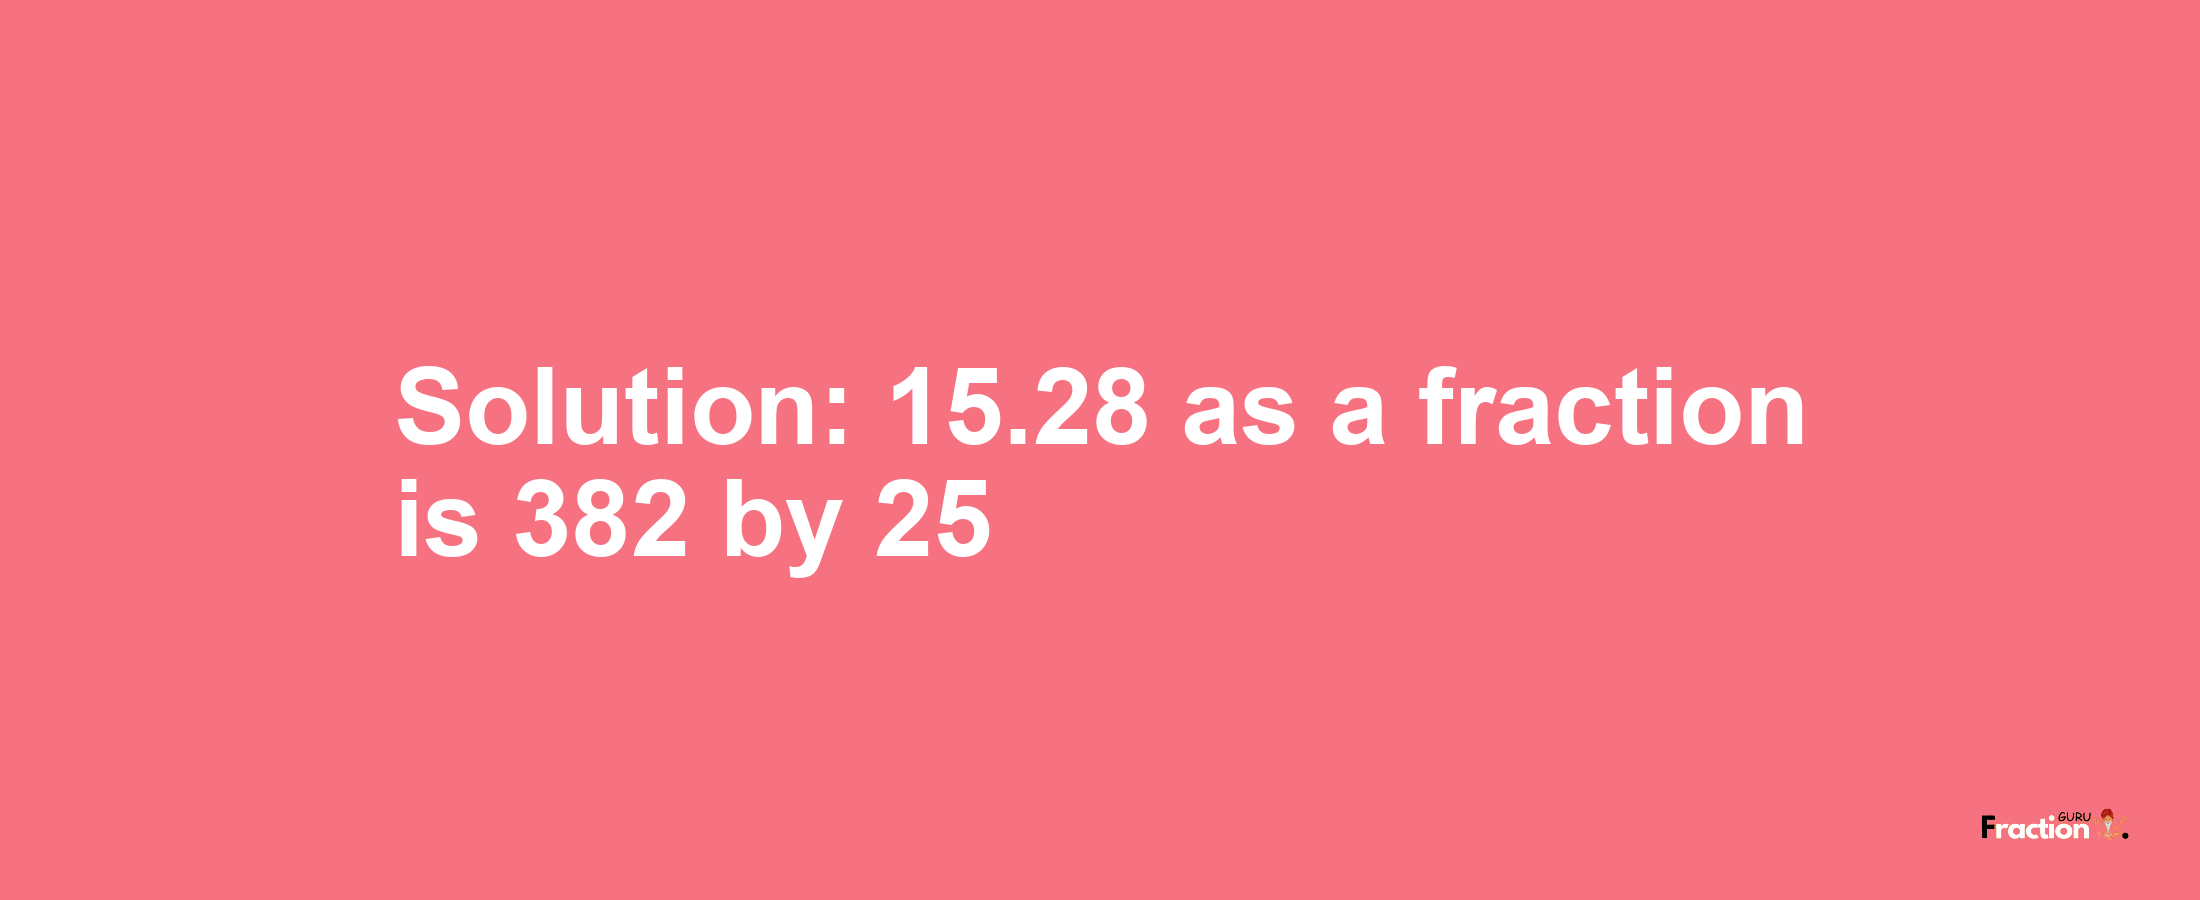 Solution:15.28 as a fraction is 382/25